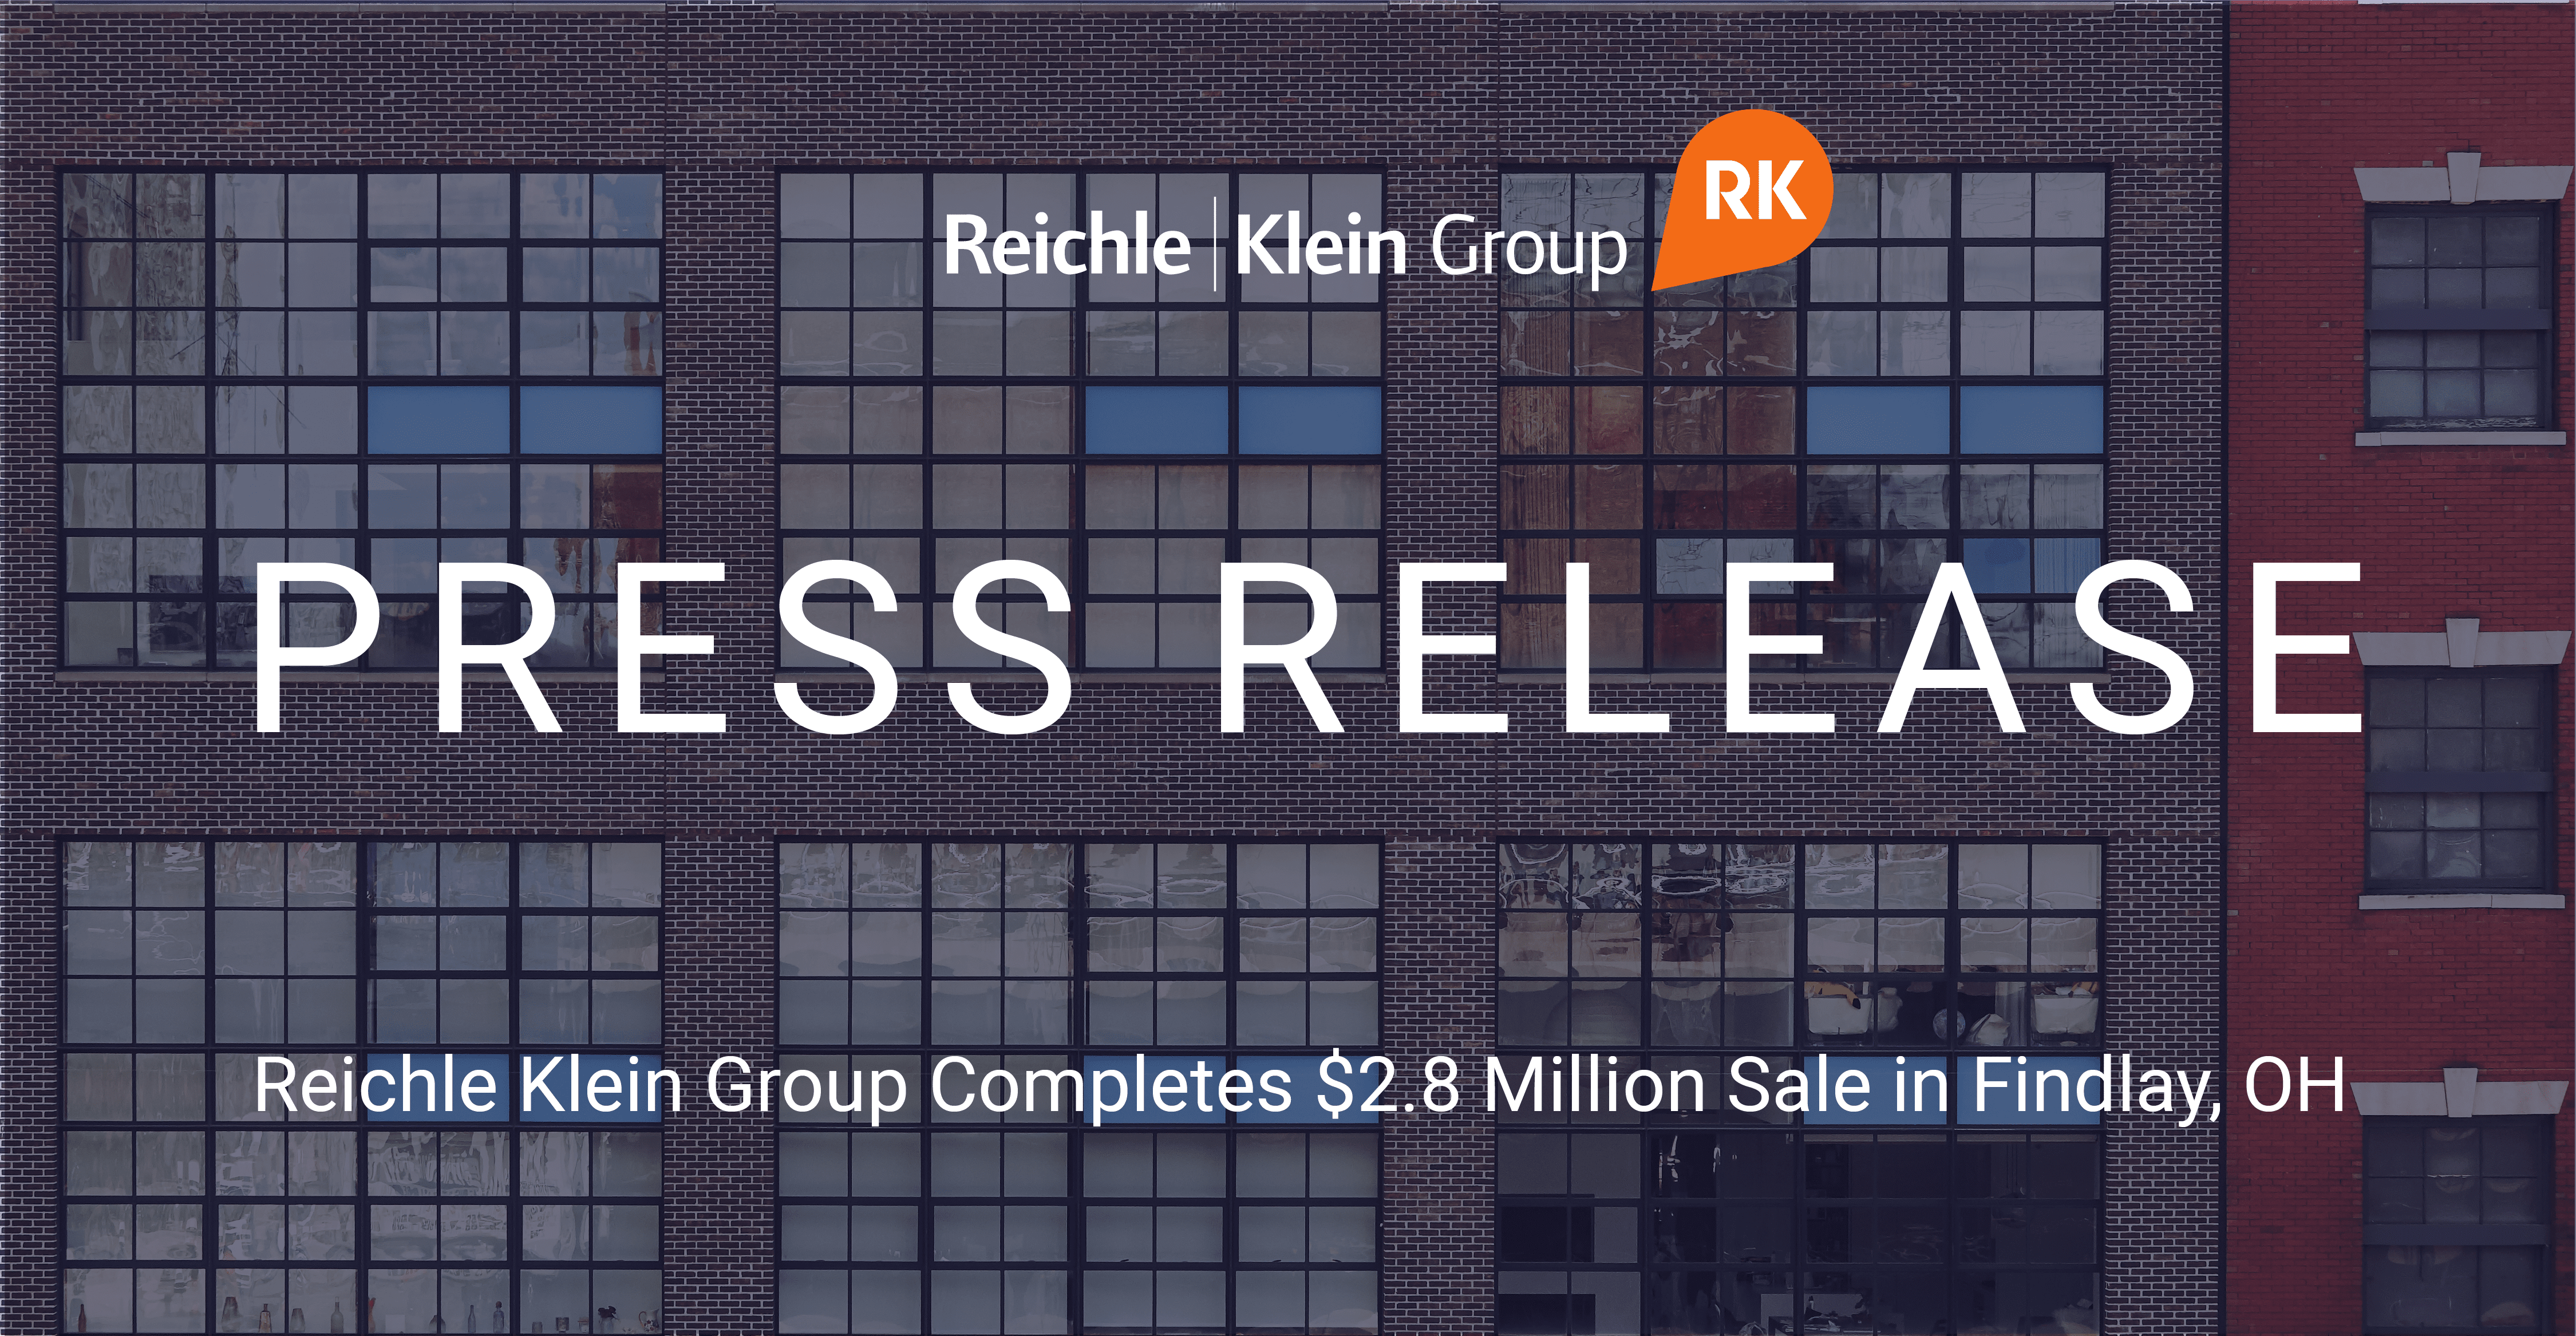 Reichle Klein Group Completes $2.8 Million Sale in Findlay, OH